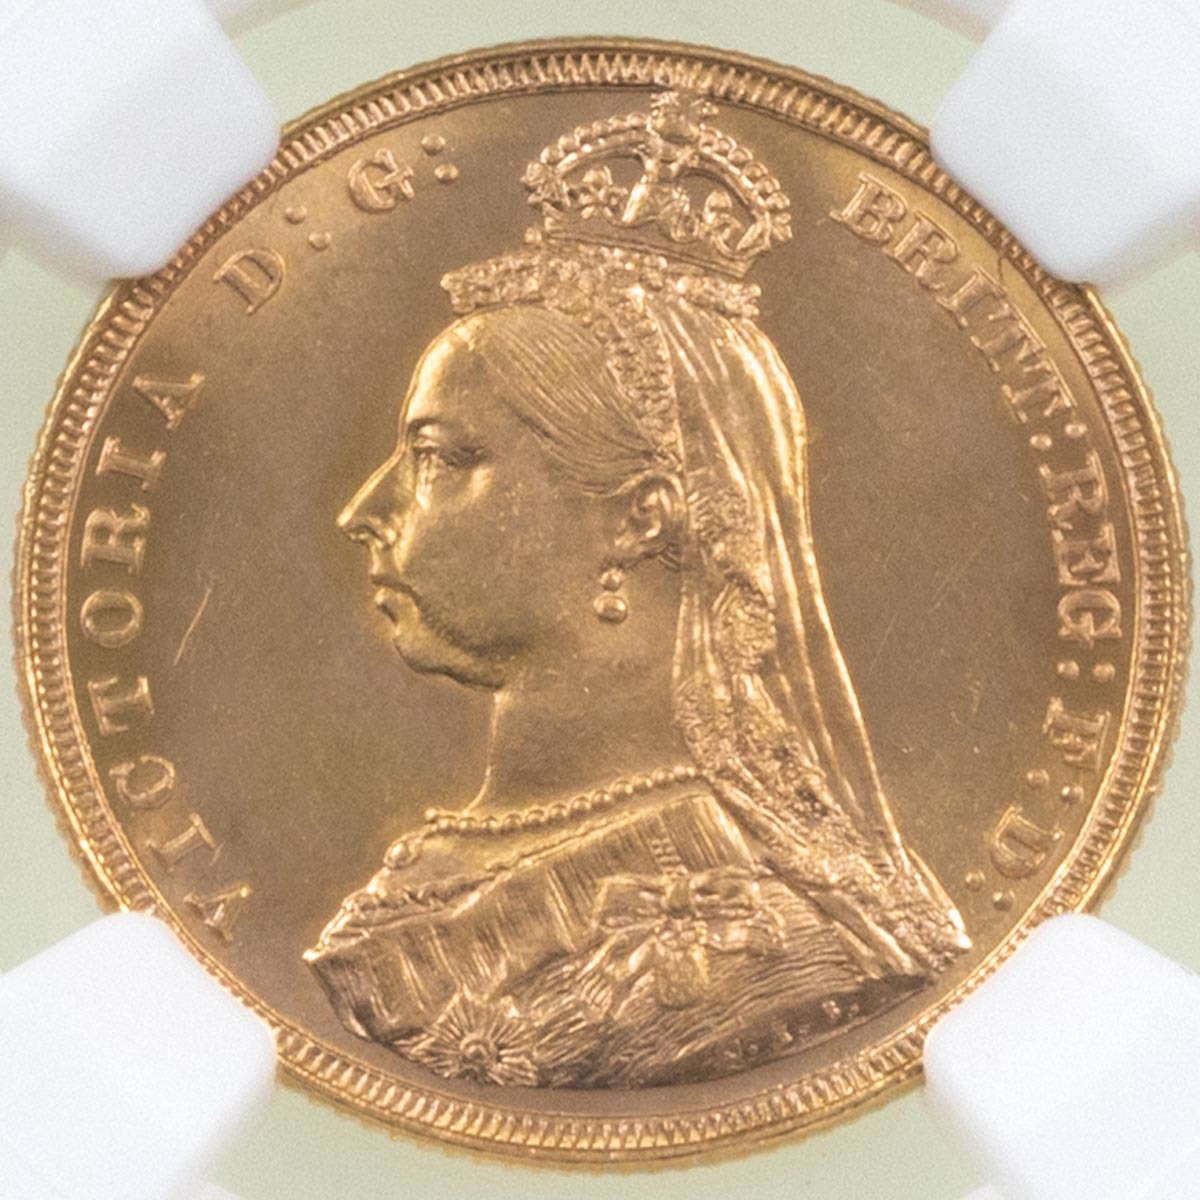 1887 Queen Victoria Gold Full Sovereign Melbourne Australia Mint NGC Graded MS 63 Obverse